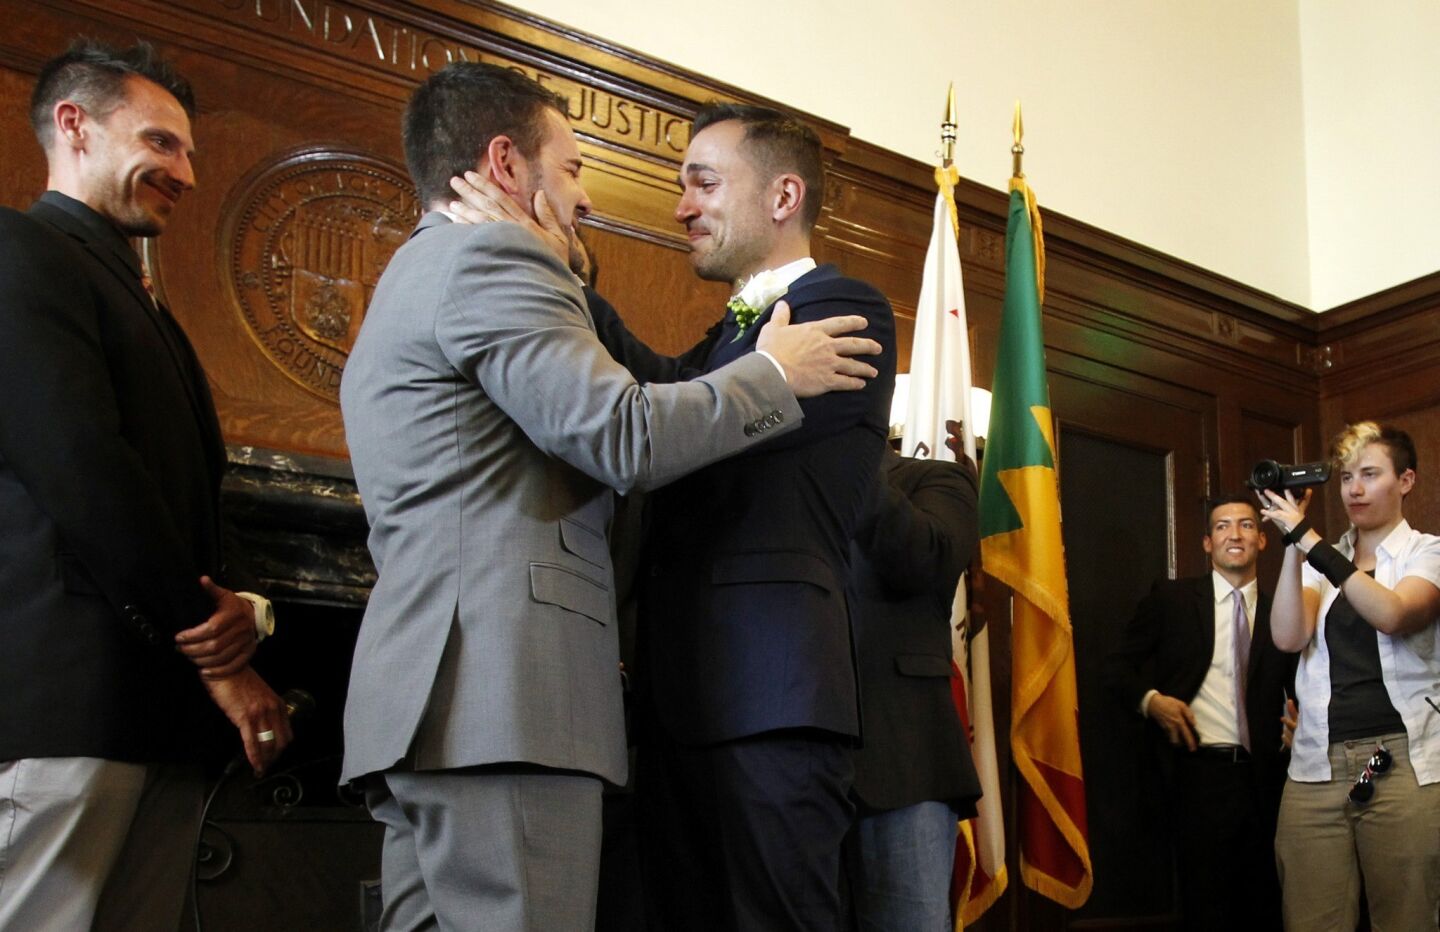 Jeff Zarrillo, left, and Paul Katami are married by Mayor Antonio Villaraigosa at City Hall in downtown Los Angeles after the 9th Circuit Court lifted the stay on same-sex marriage in California.